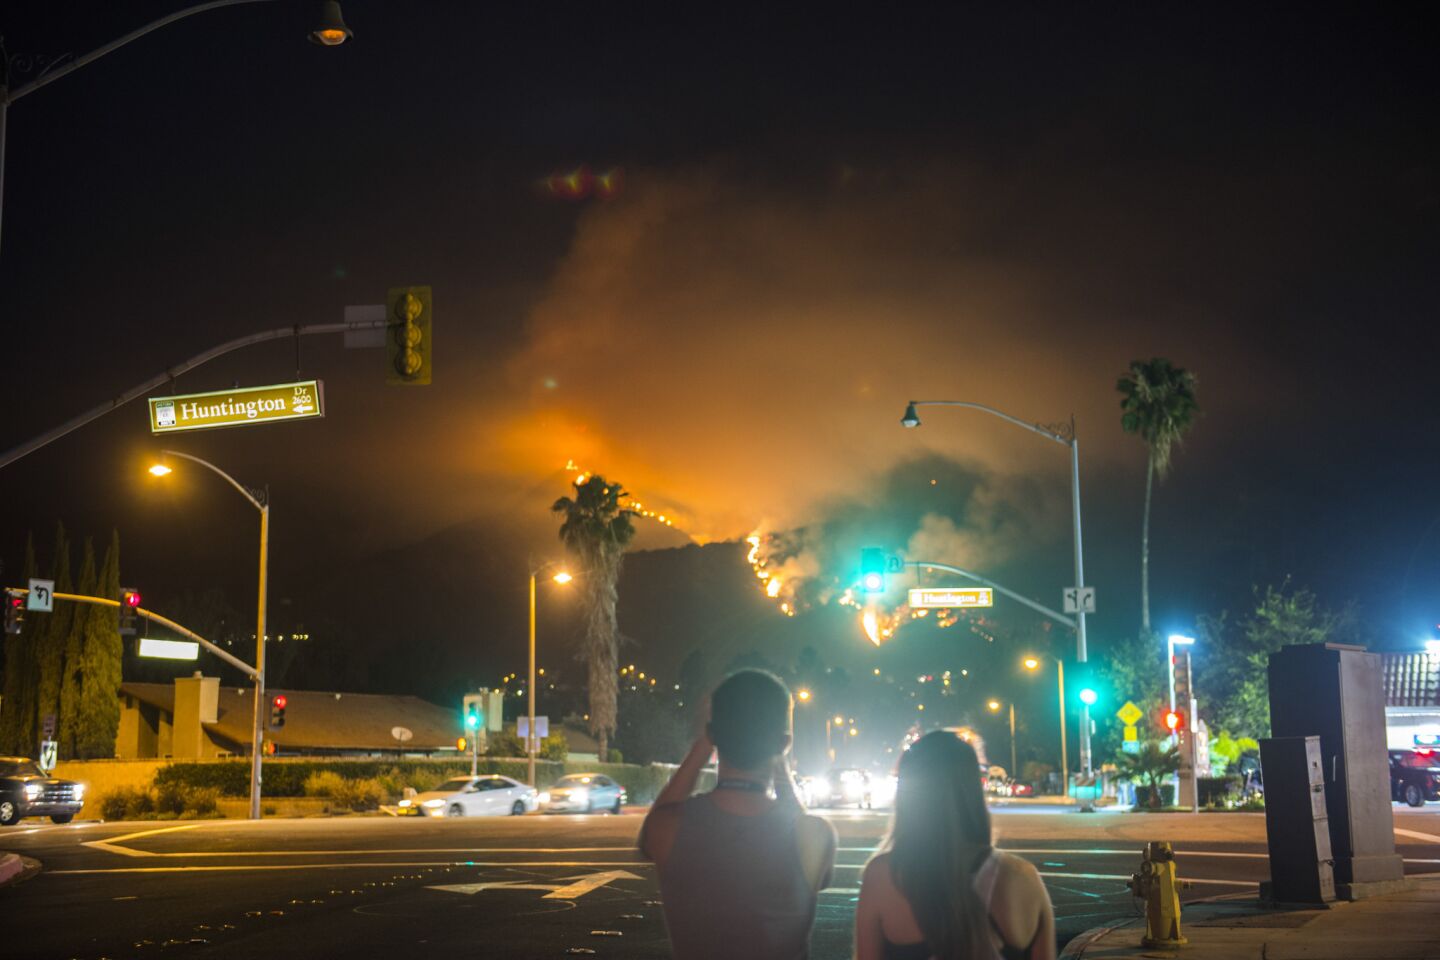 Onlookers take pictures of the Fish fire Monday evening off Huntington Drive as the fire burns uphill.